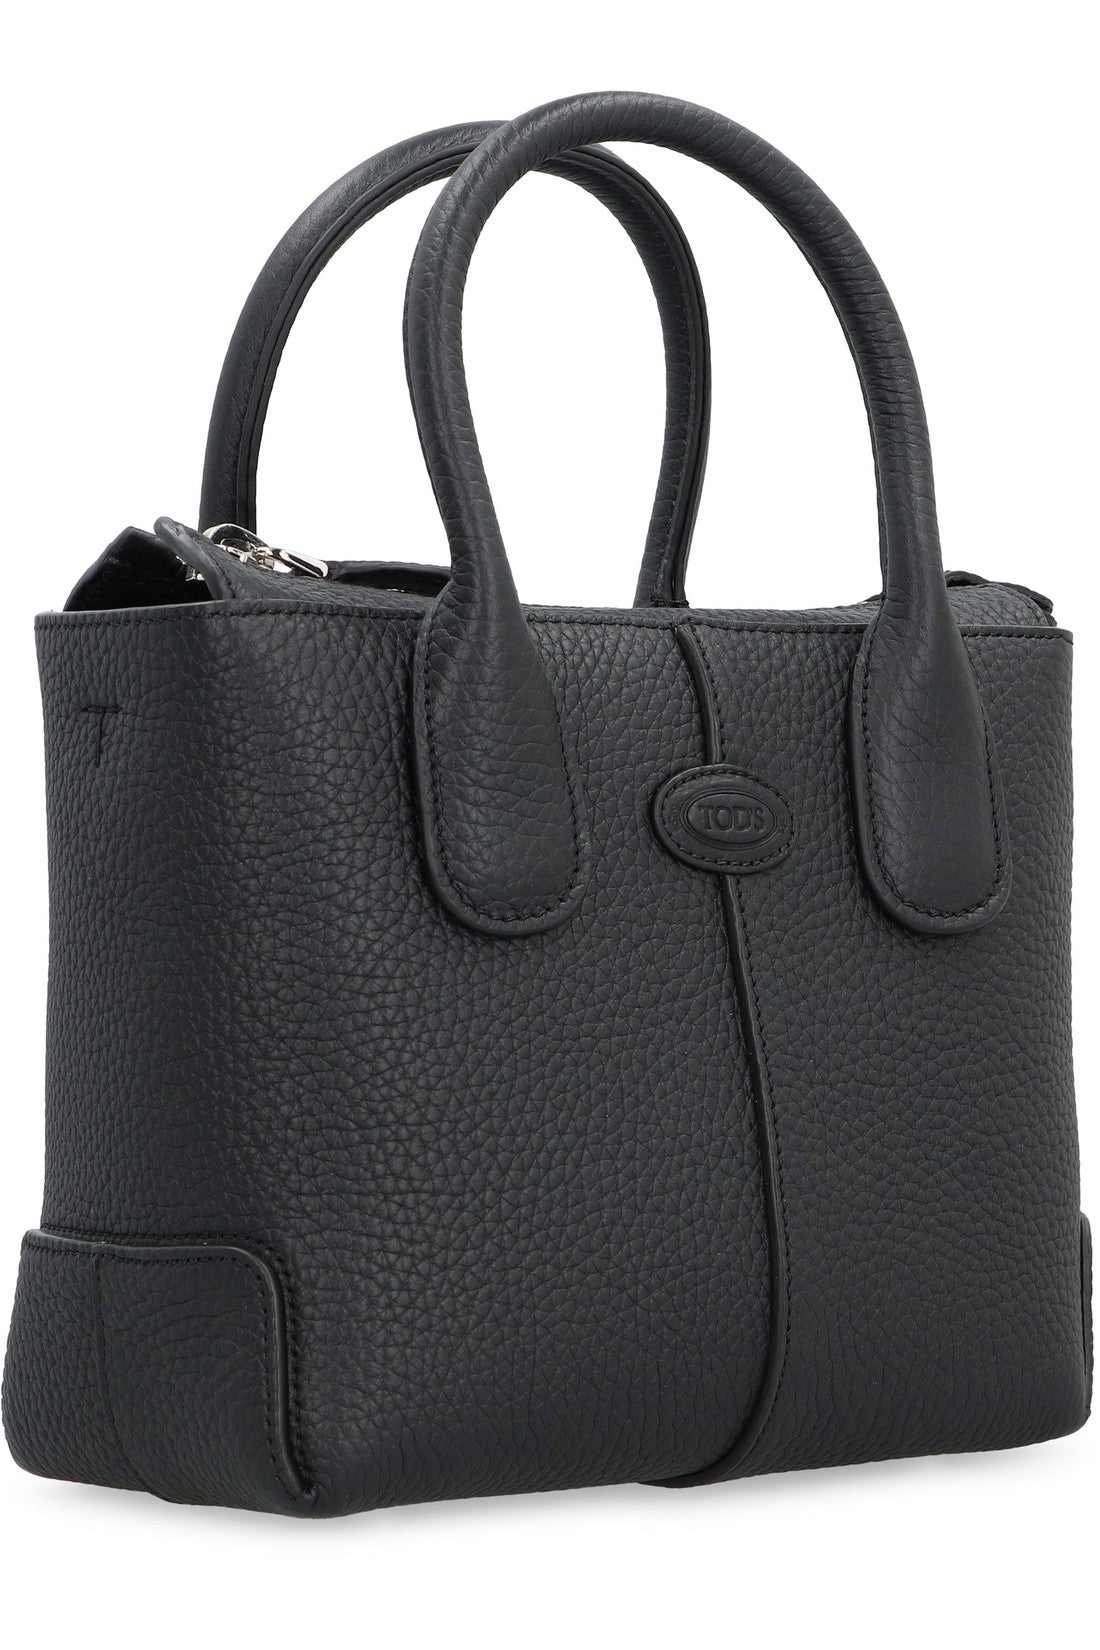 Tod's-OUTLET-SALE-Tod's Di smooth leather tote bag-ARCHIVIST